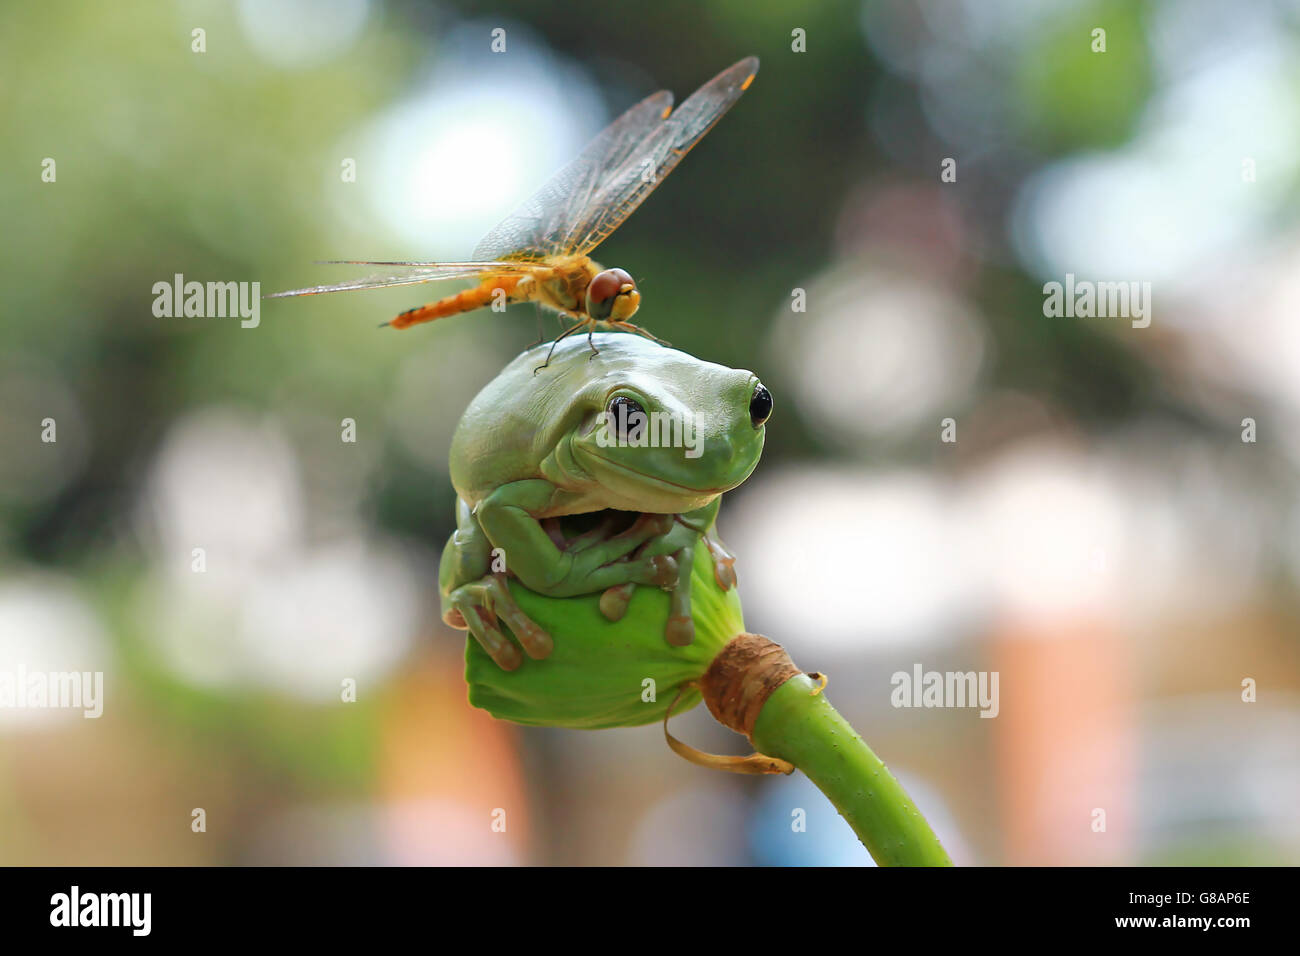 Dragonfly sitting on dumpy frog, Indonesia Stock Photo